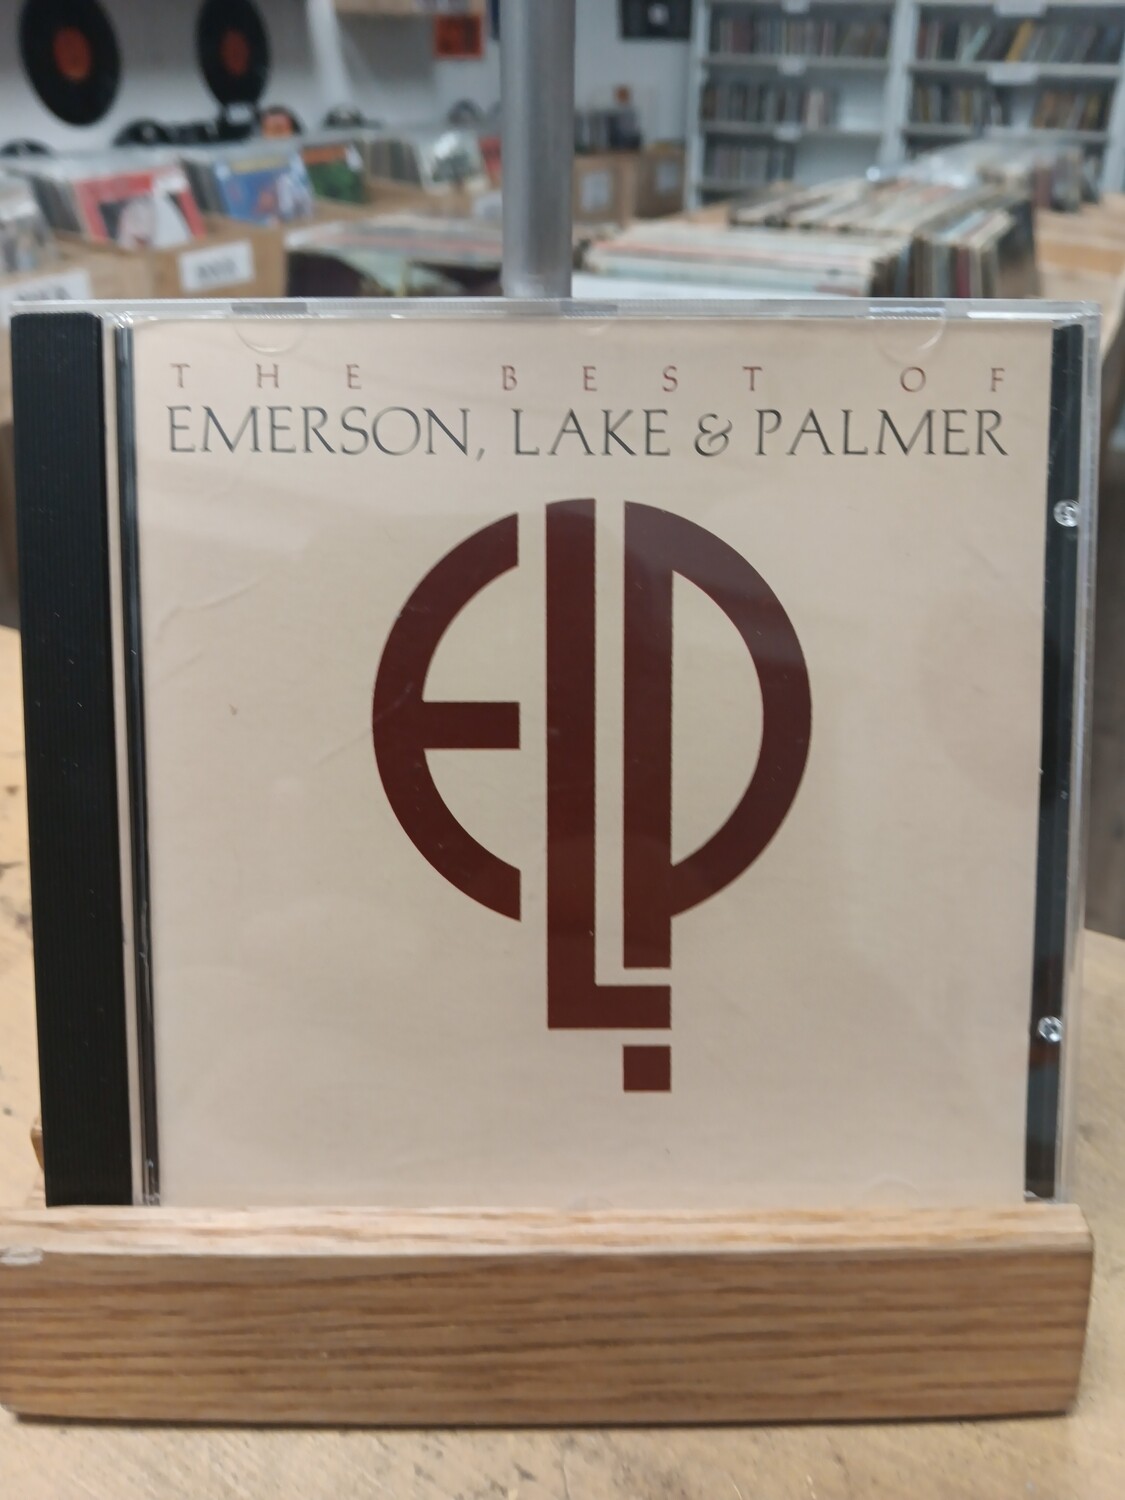 EMERSON LAKE PALMER - The Best of (CD)